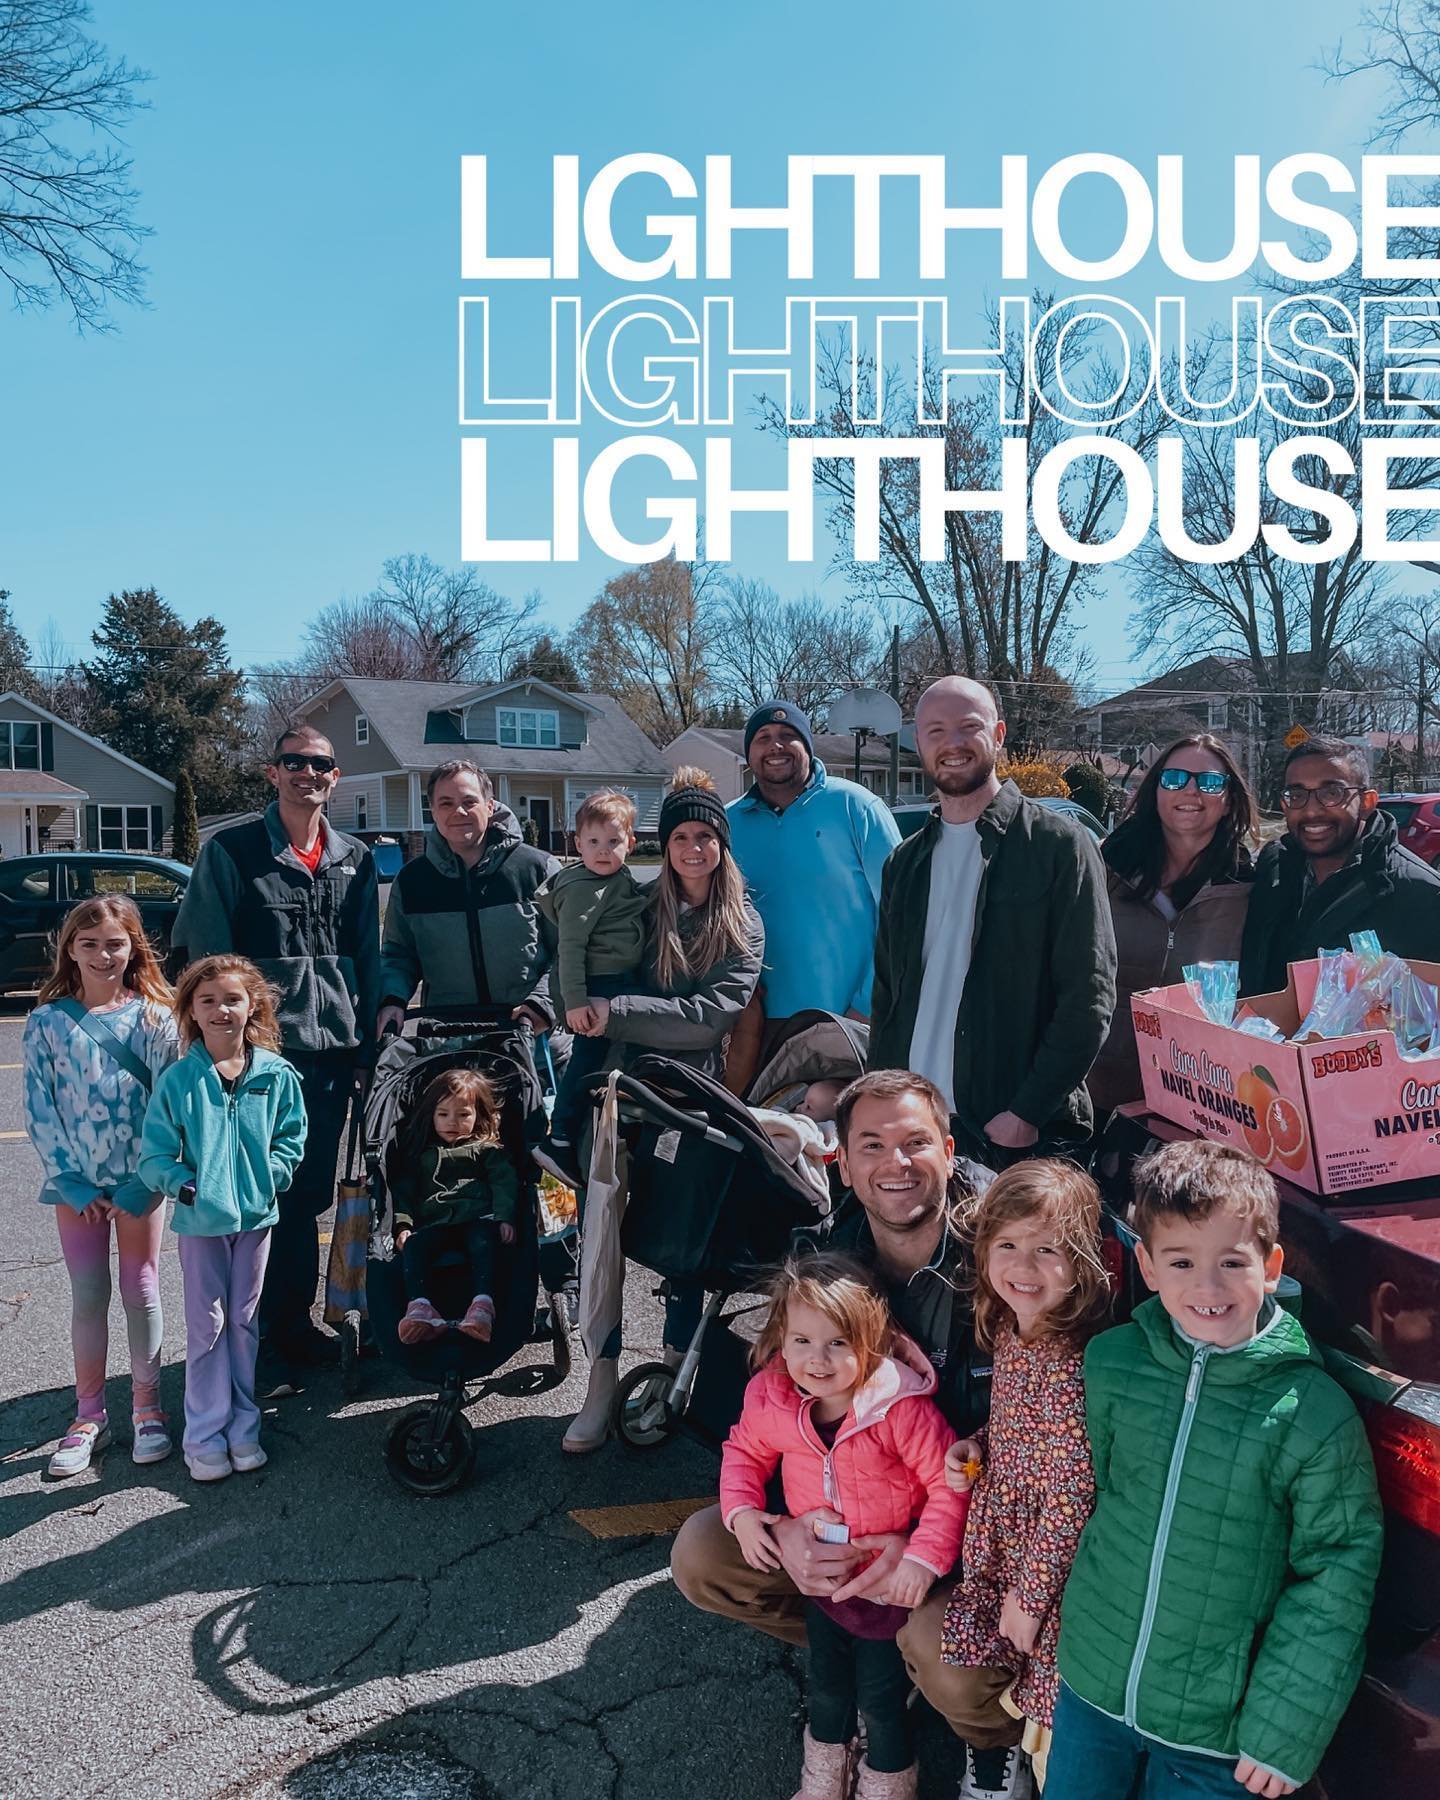 One of our Lighthouses made Easter invite goodie bags and handed them out in the neighborhoods around the church last week ✨ This is just one example of how Lighthouses encourage one another, and live on mission together 🏘️

As we were encouraged in